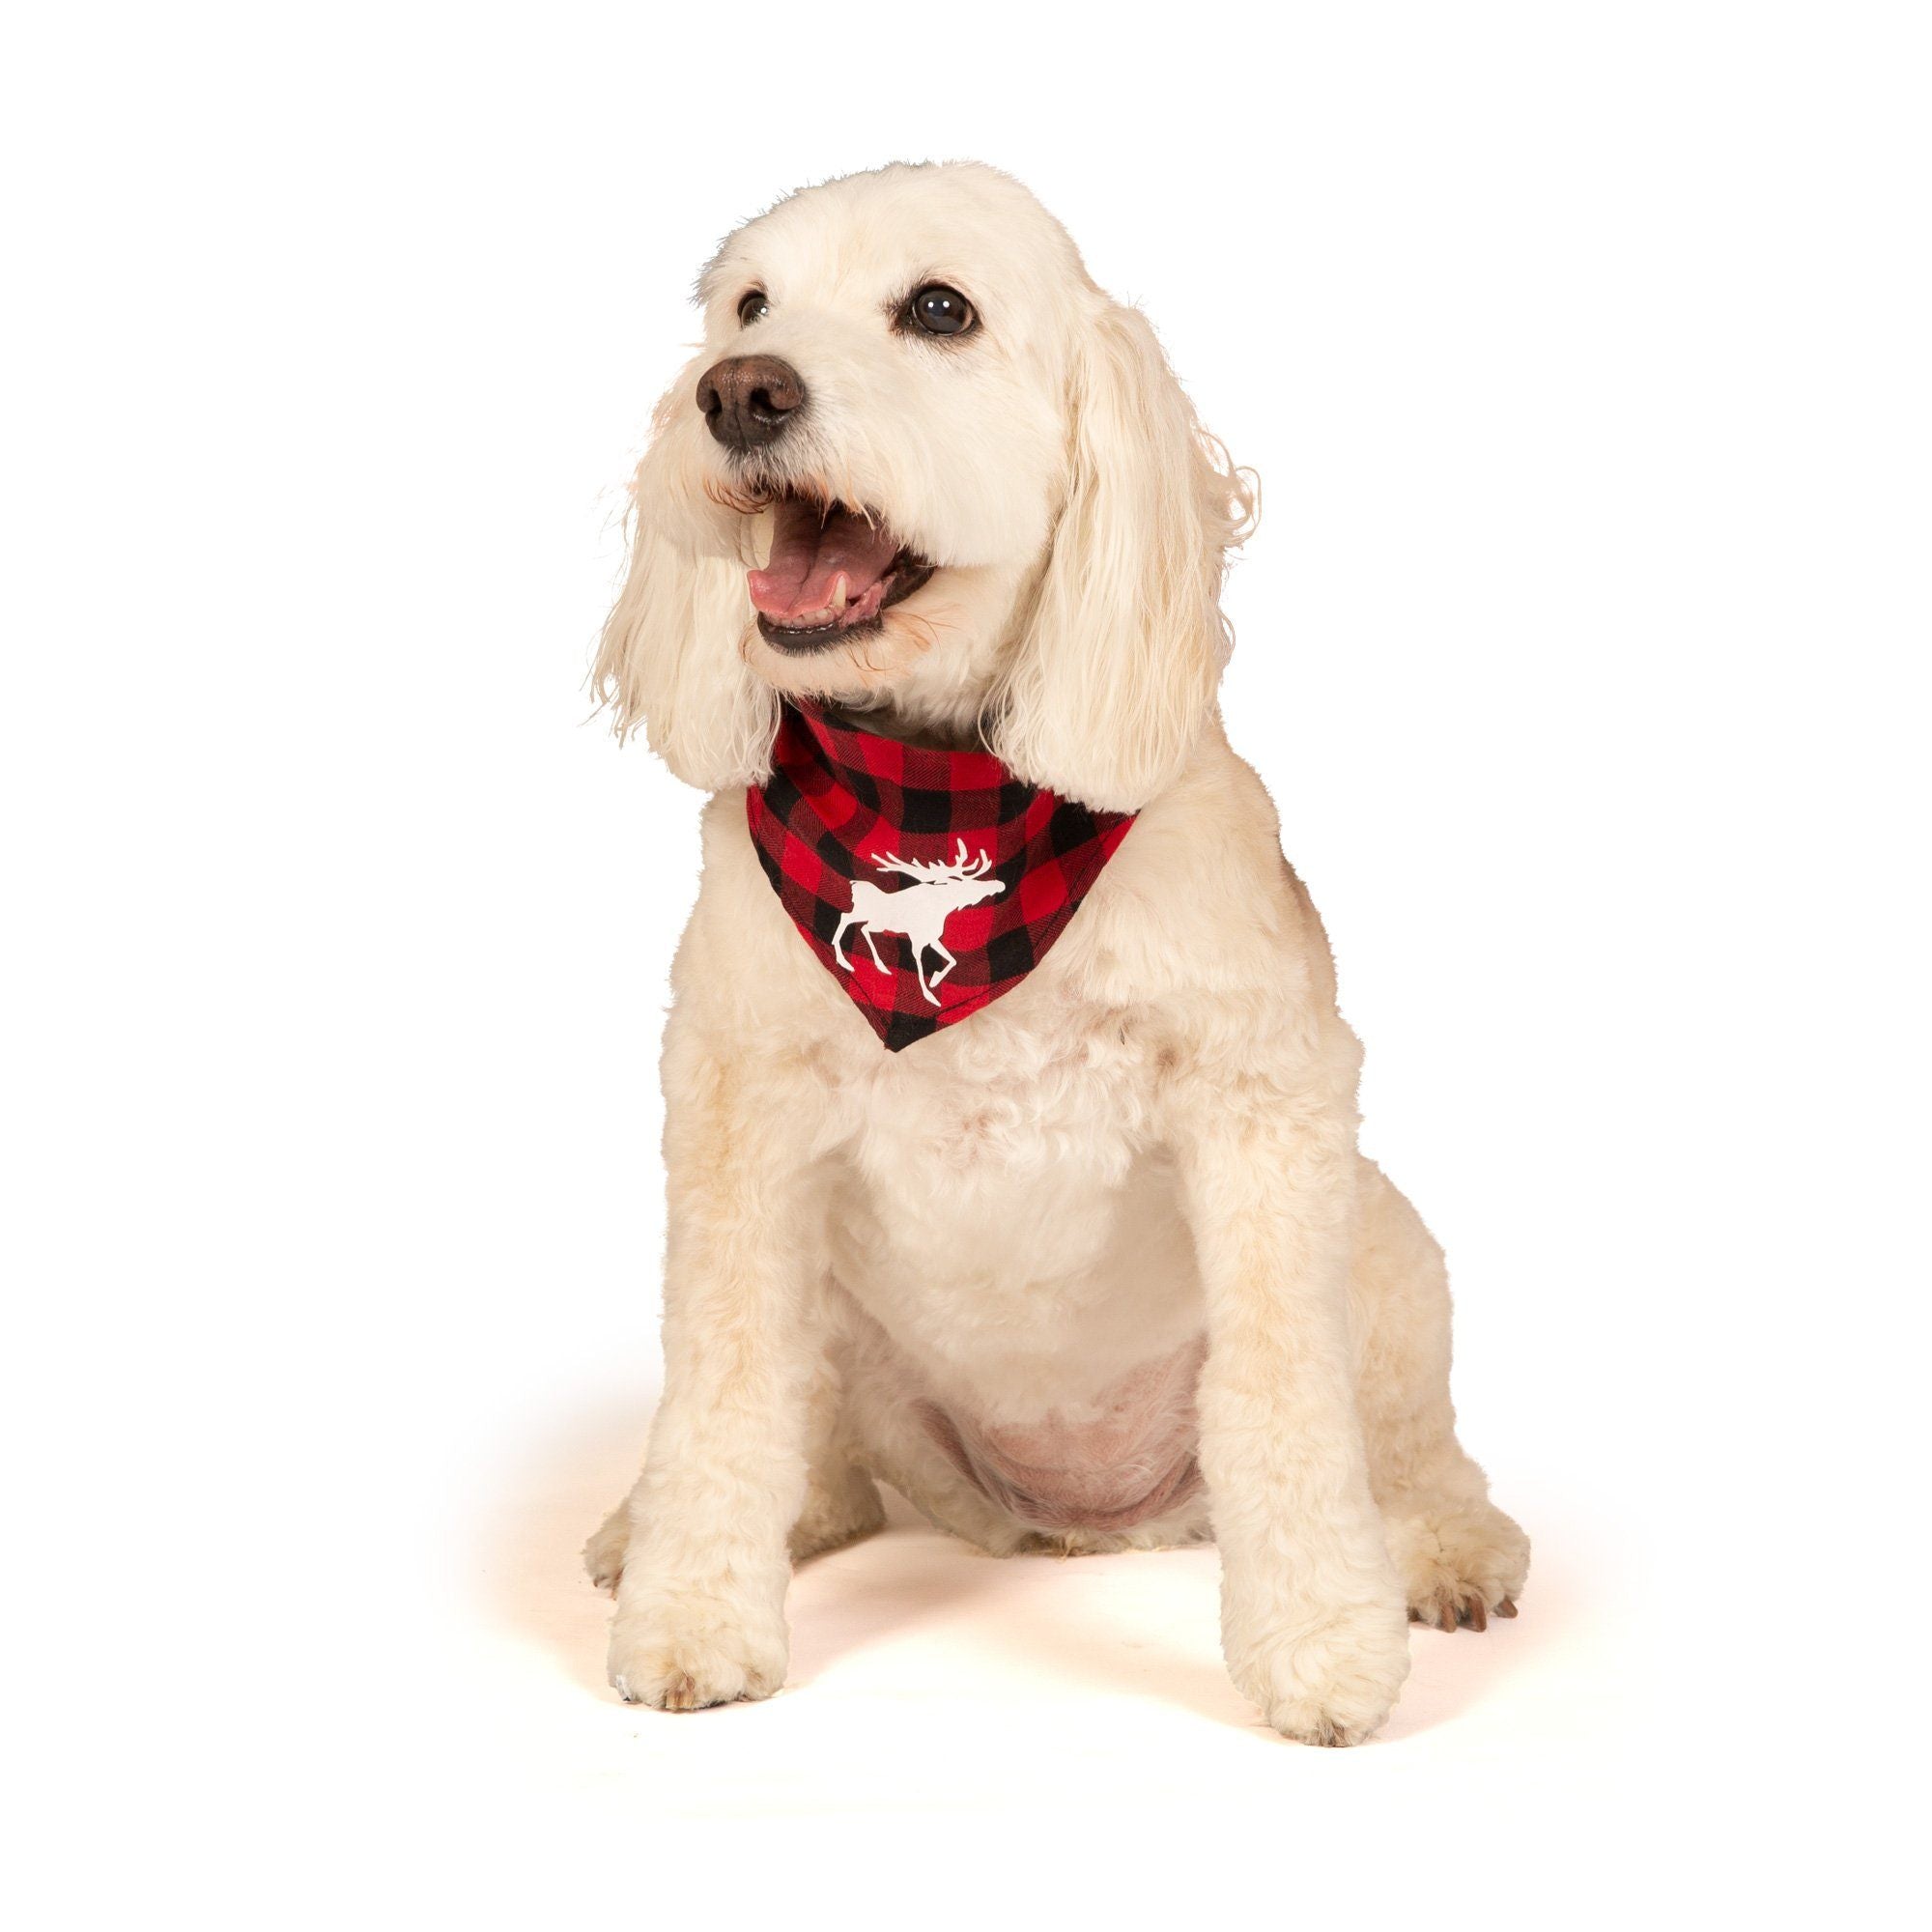 red and black plaid bandana for dogs matches family pjs